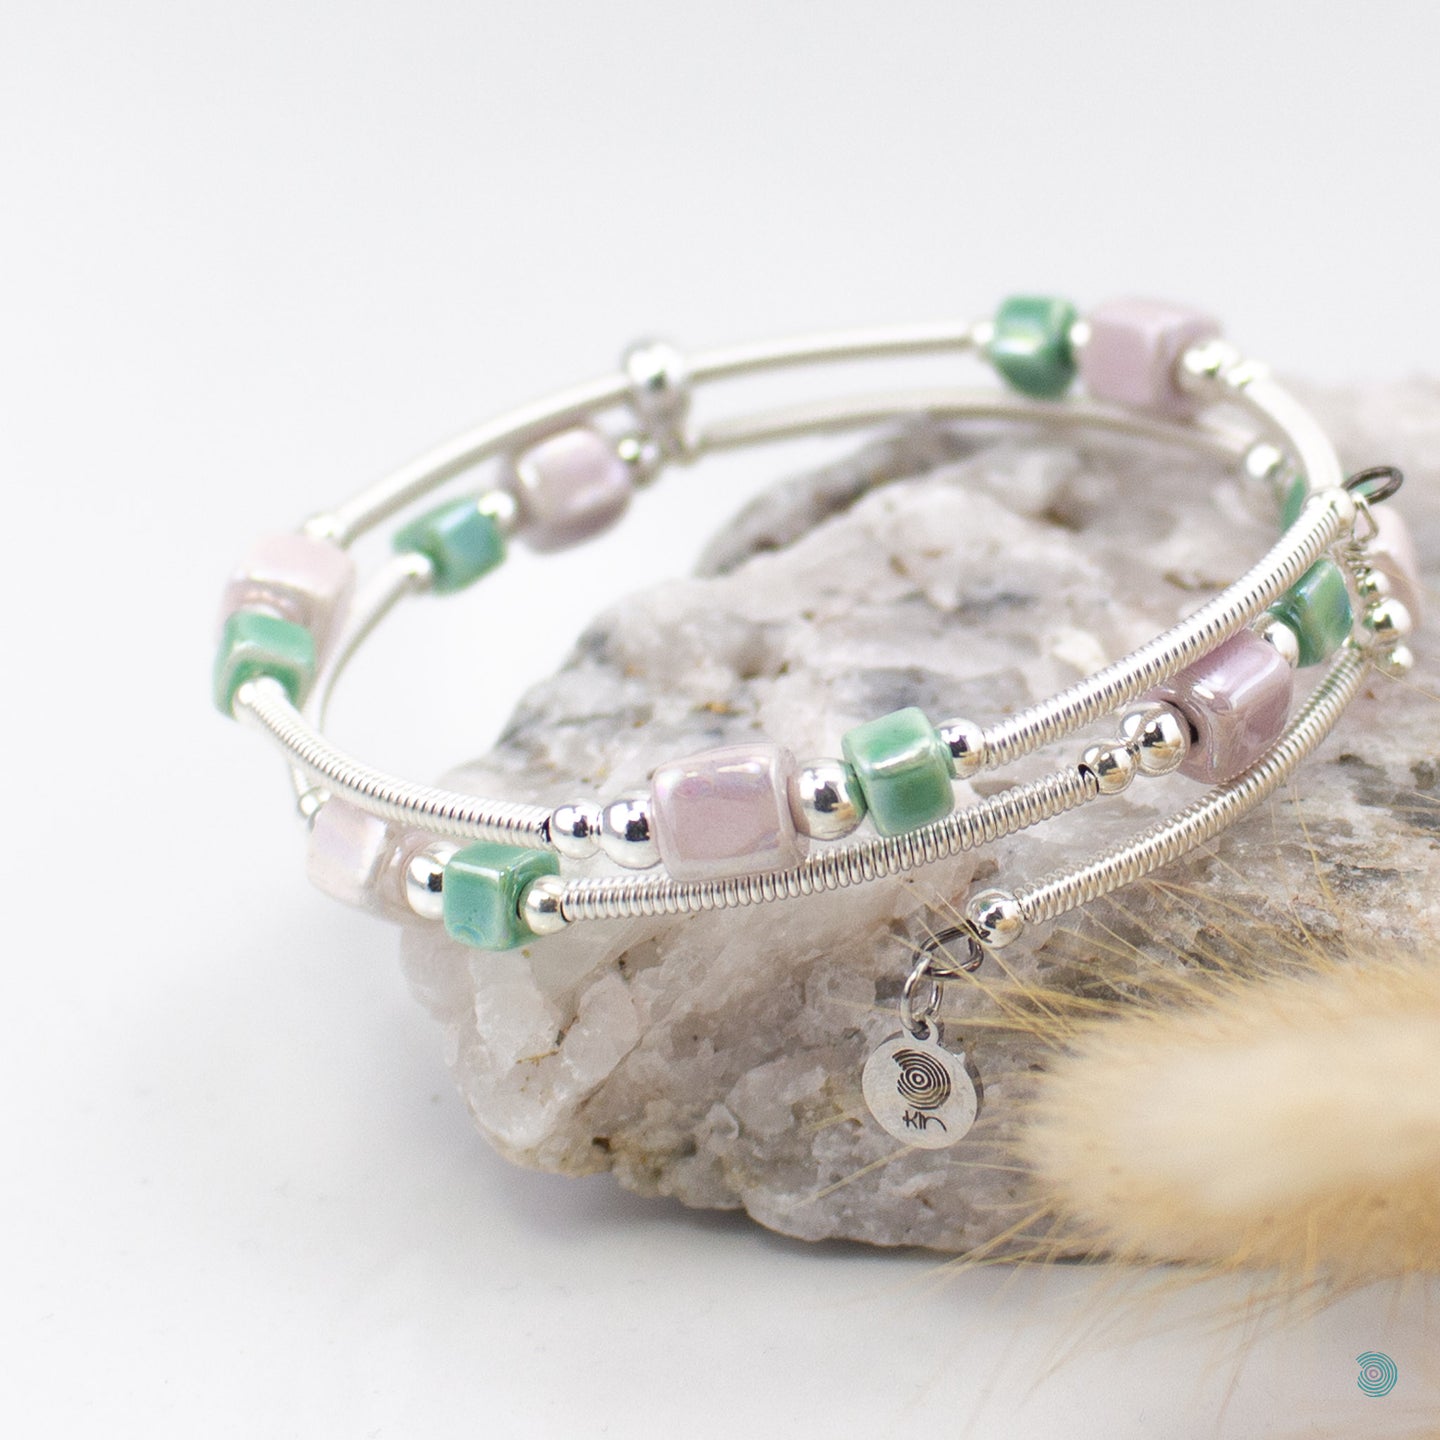 Easy to wear bracelet that simply wraps around the wrist and sits in place. No clasp needed. Hand wrapped silver filled tubes, with ceramic cubes in pale lilac and green colour mix with small sterling silver beads on each side and 